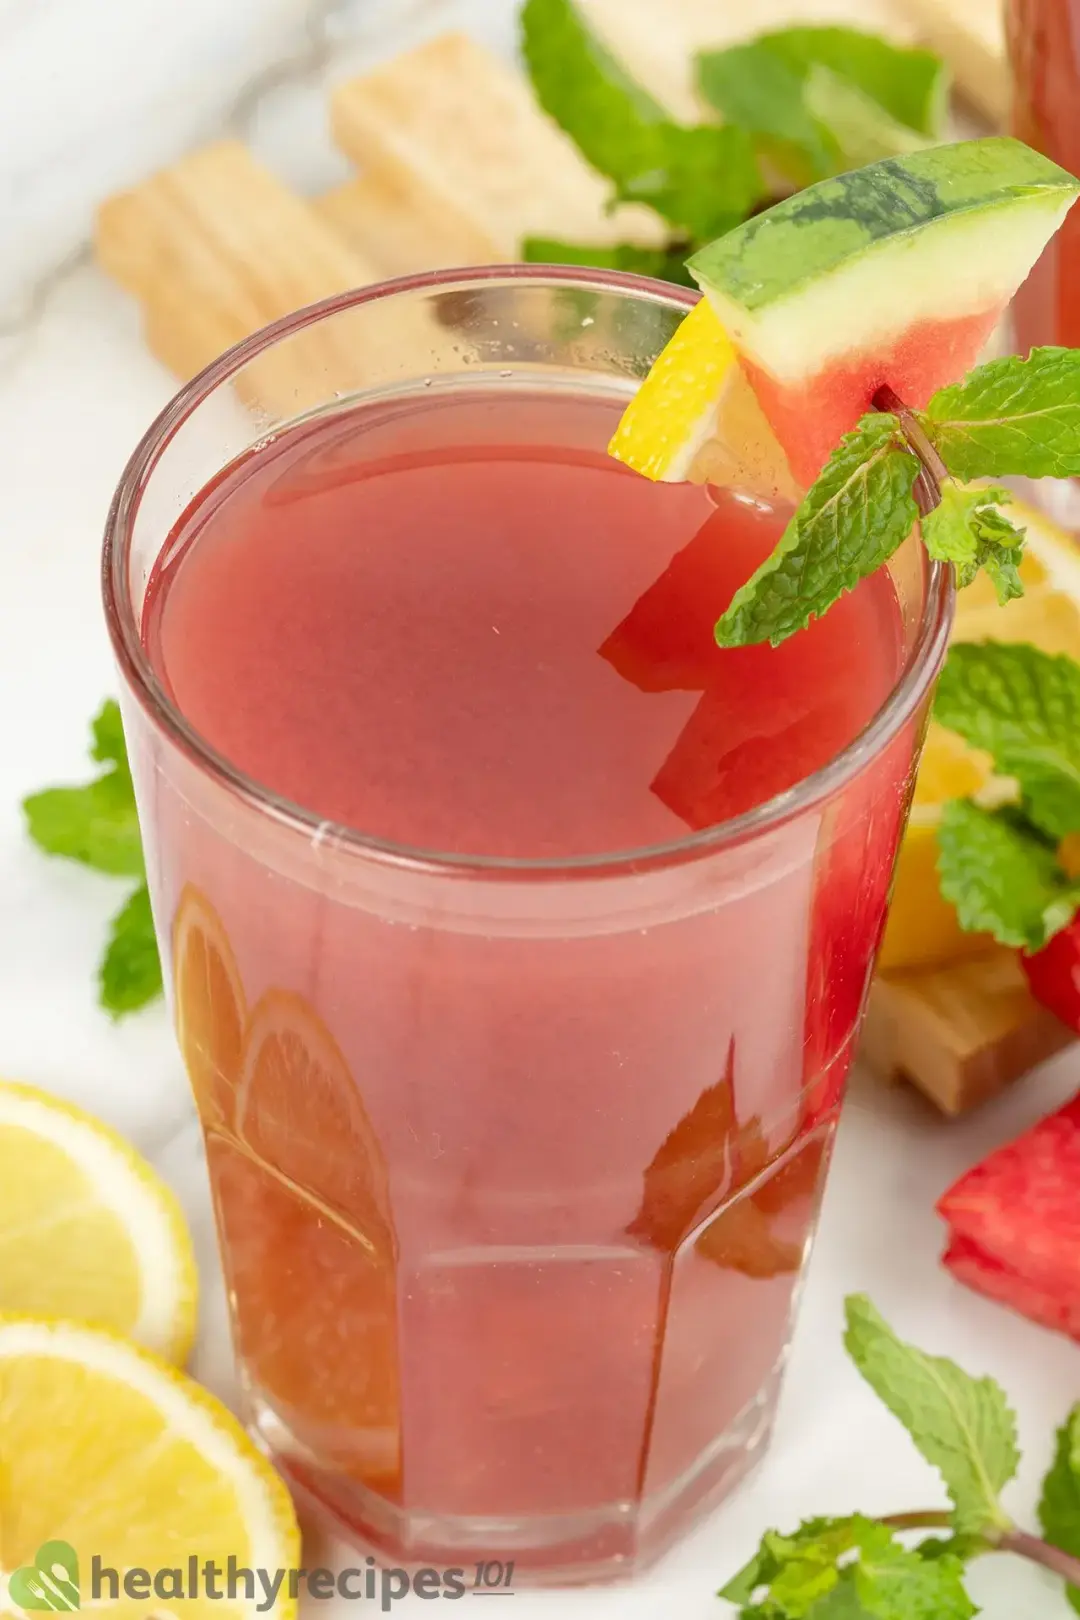 A high-angle shot of a glass of watermelon cucumber juice decorated by a piece of lemon, a piece of watermelon, and mint leaves